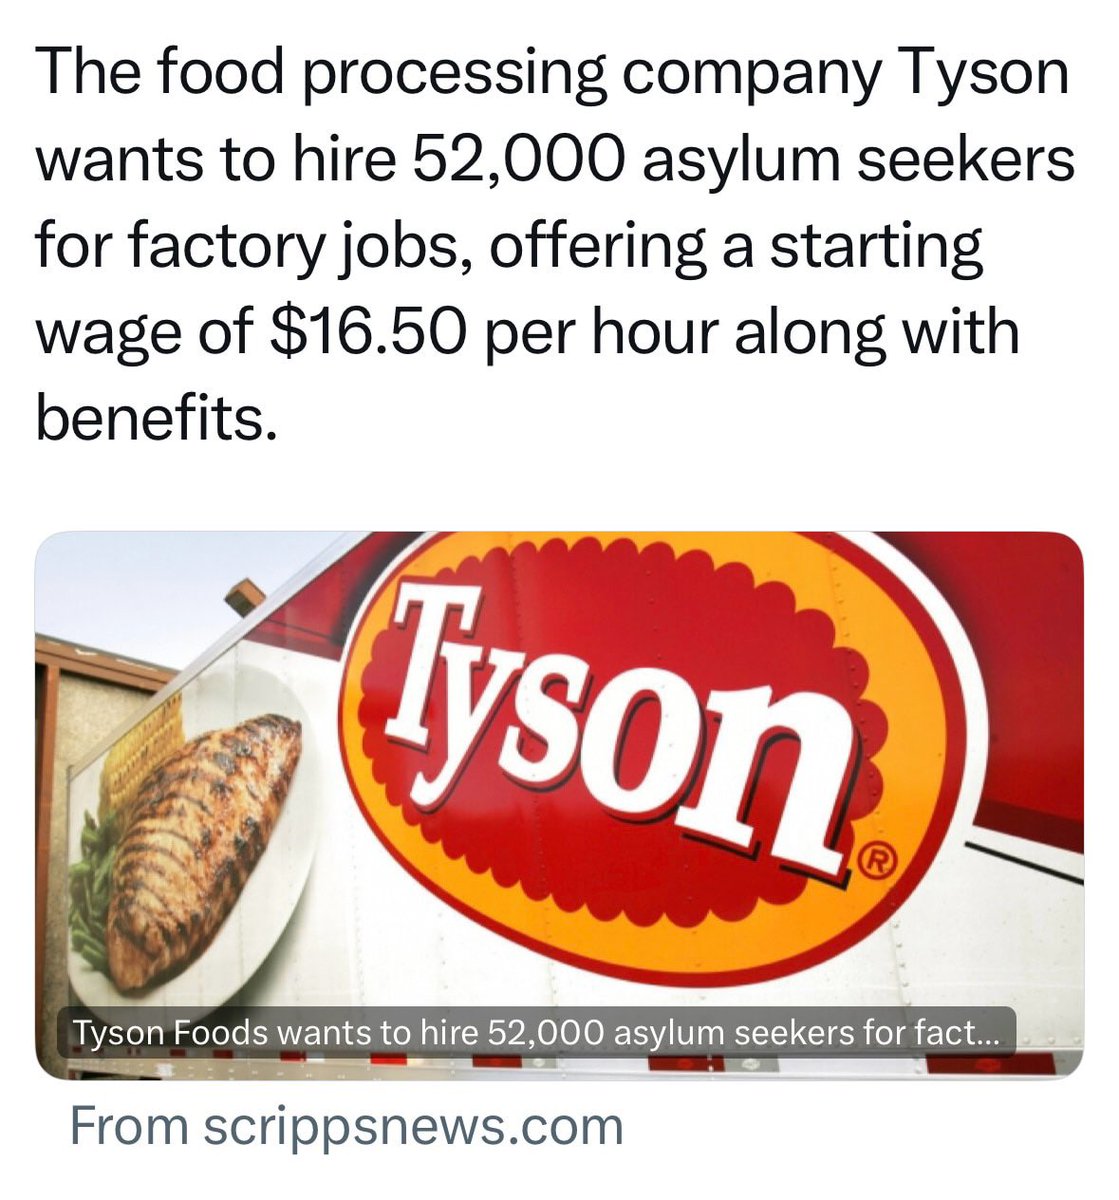 Tyson states it’s only 2,500 illegals over the next 3 yrs. The numbers can’t be verified at this time. The fact is they fired 1,200 American workers. Tyson can spin this but the facts are evident that they don’t give a crap about American people.